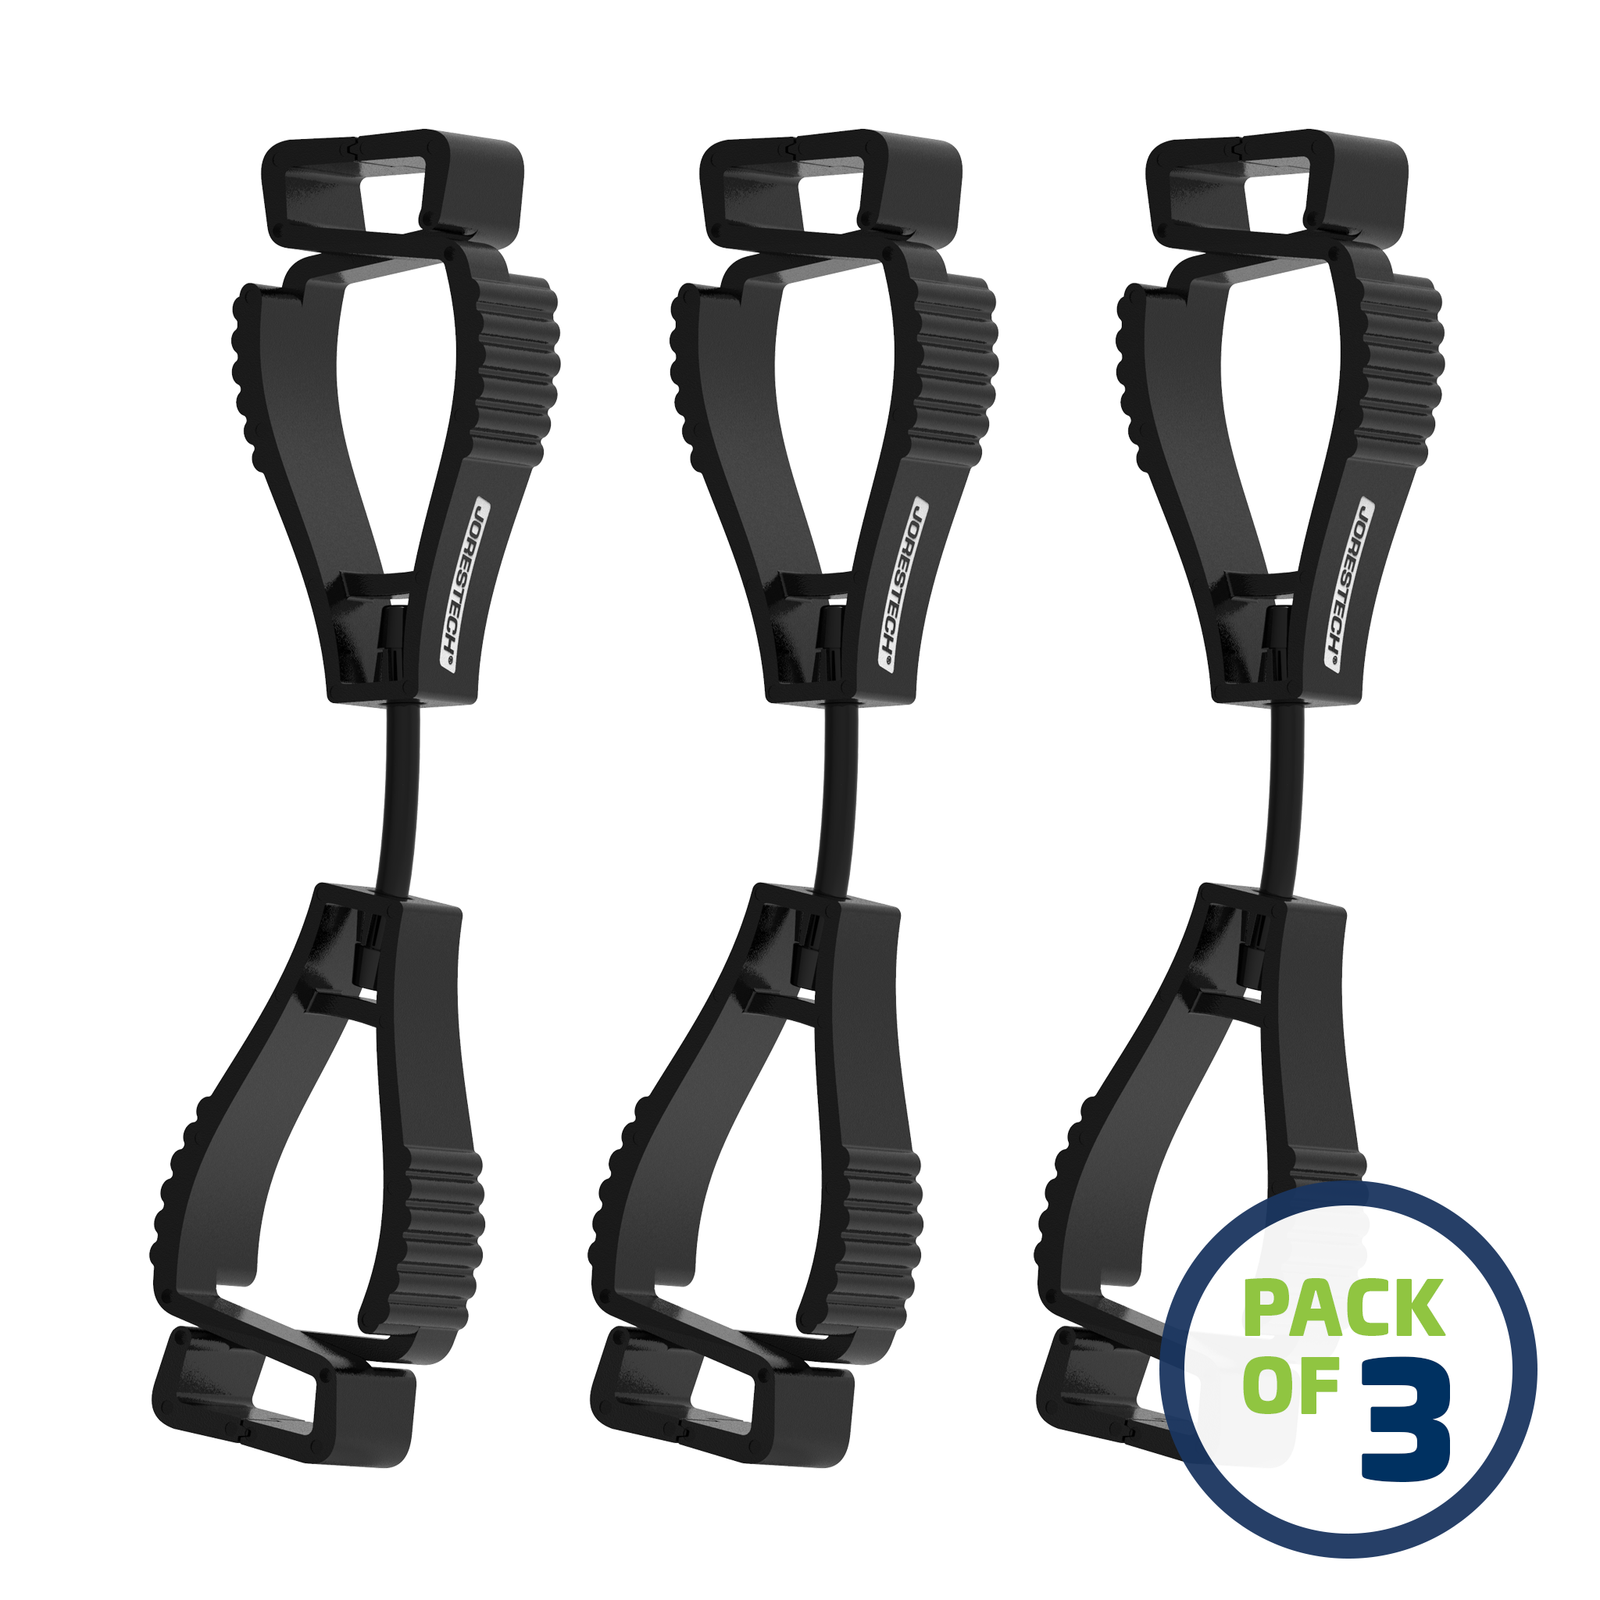 Pack of 3 Black glove clip safety holders 